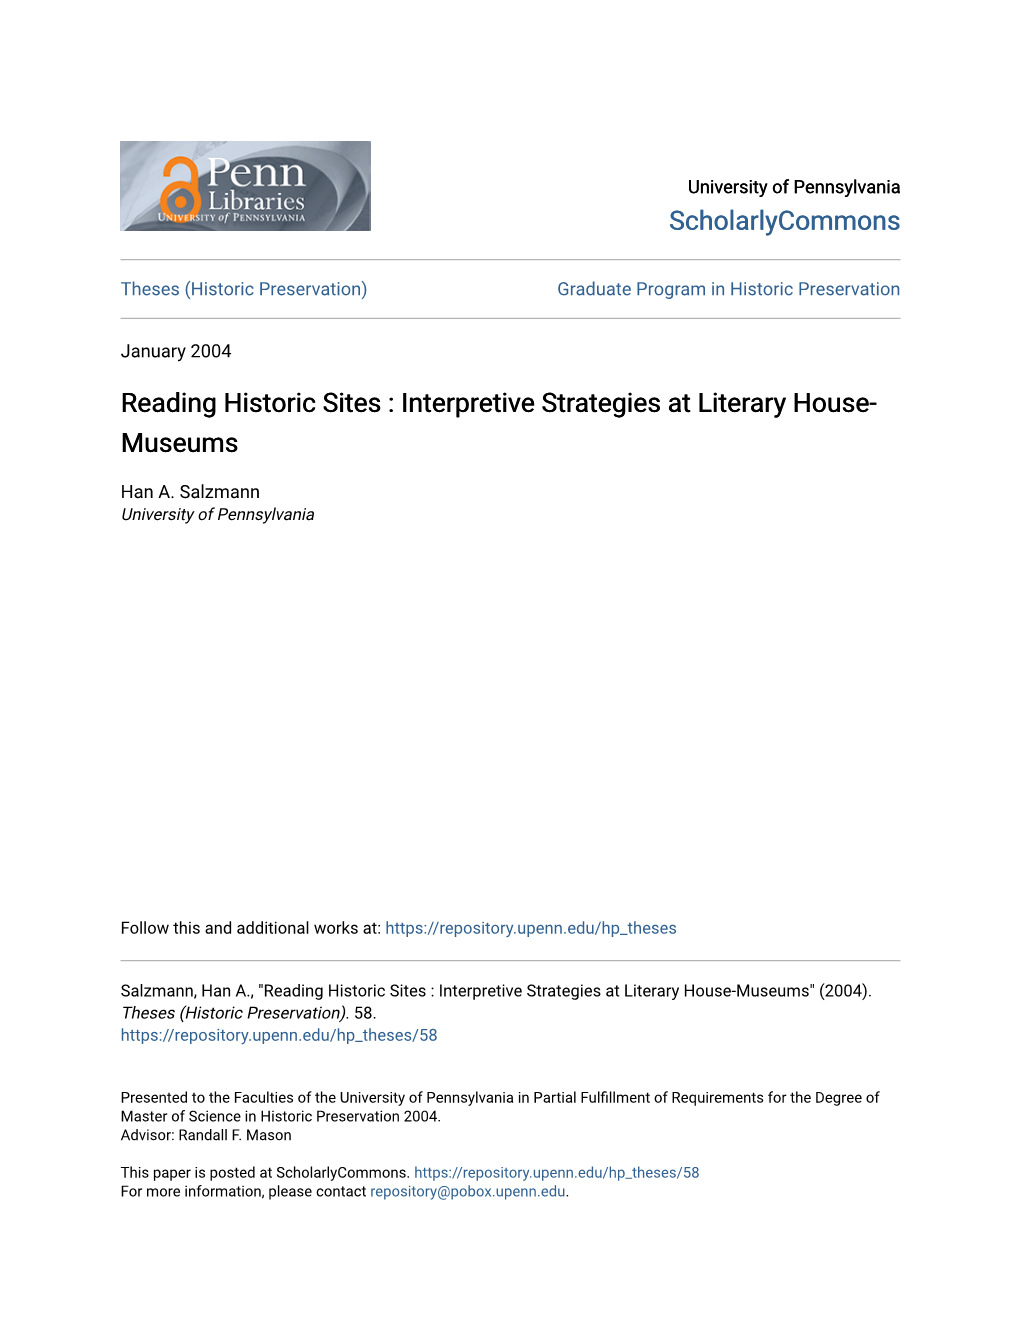 Interpretive Strategies at Literary House-Museums" (2004)